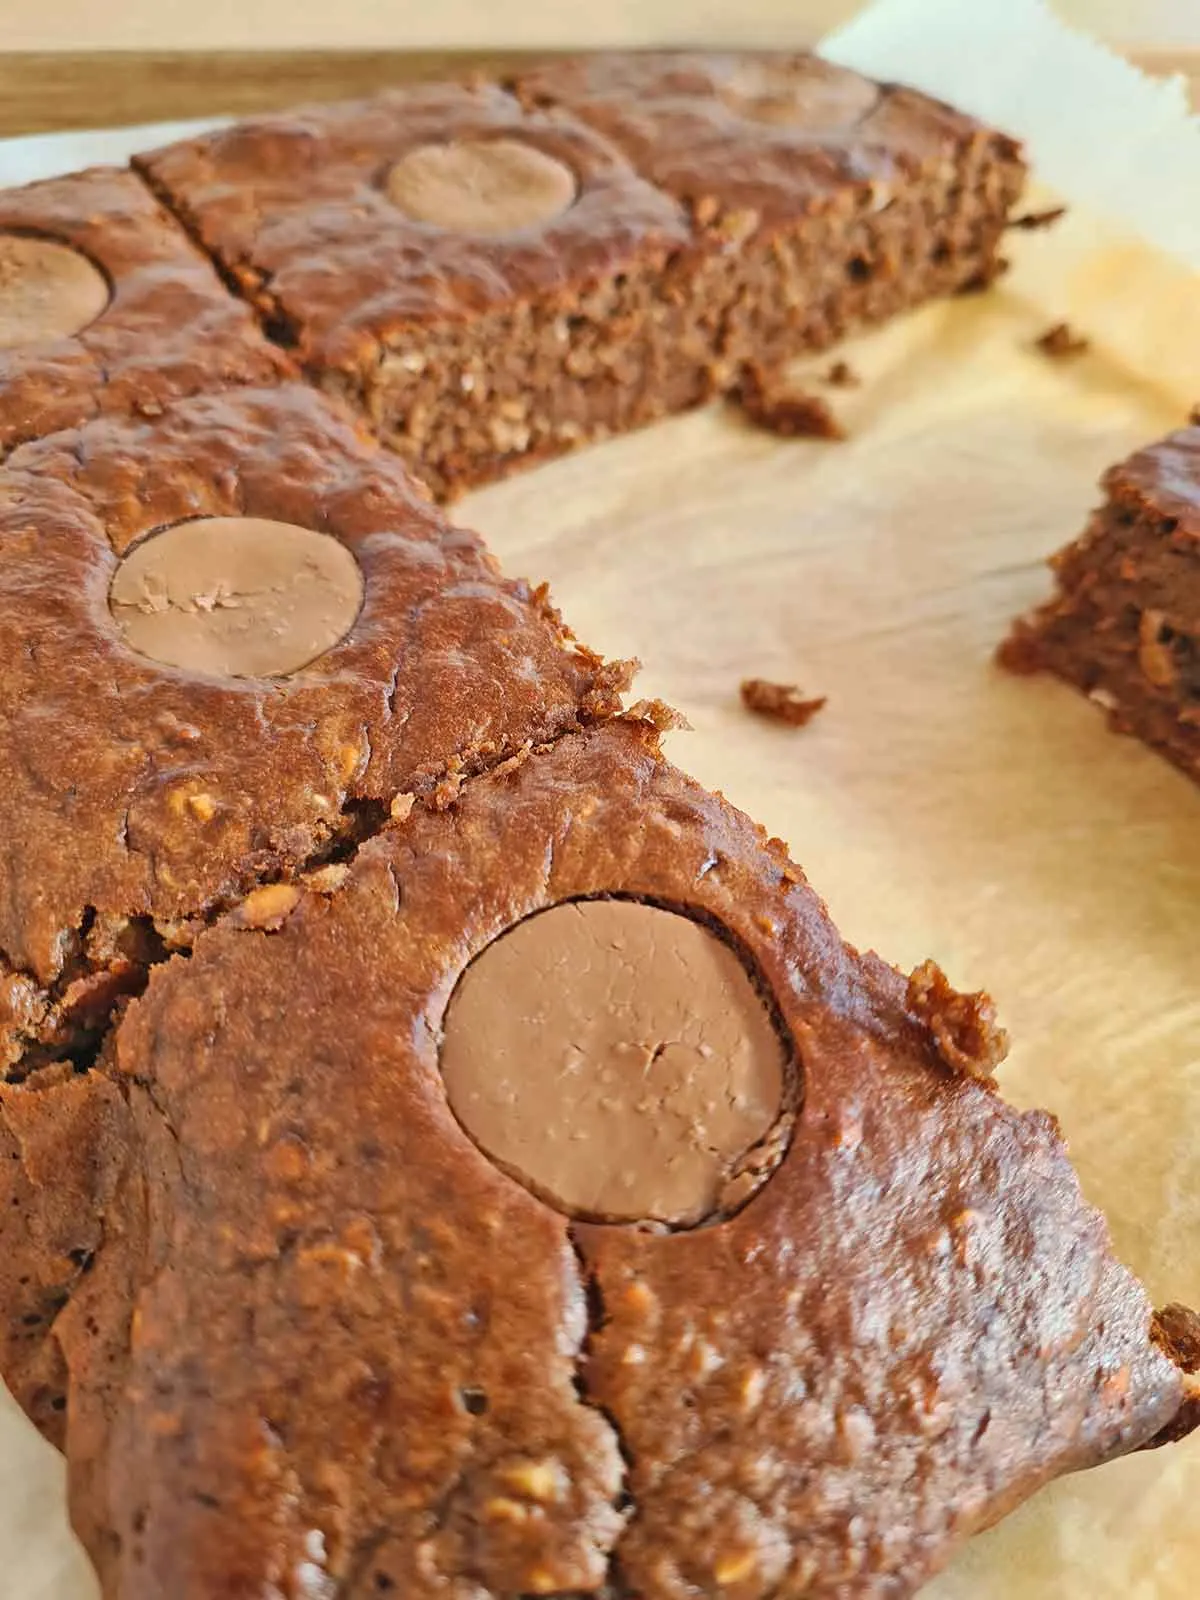 Protein Chocolate Oats Brownies with Peanut Butter - after workout snack